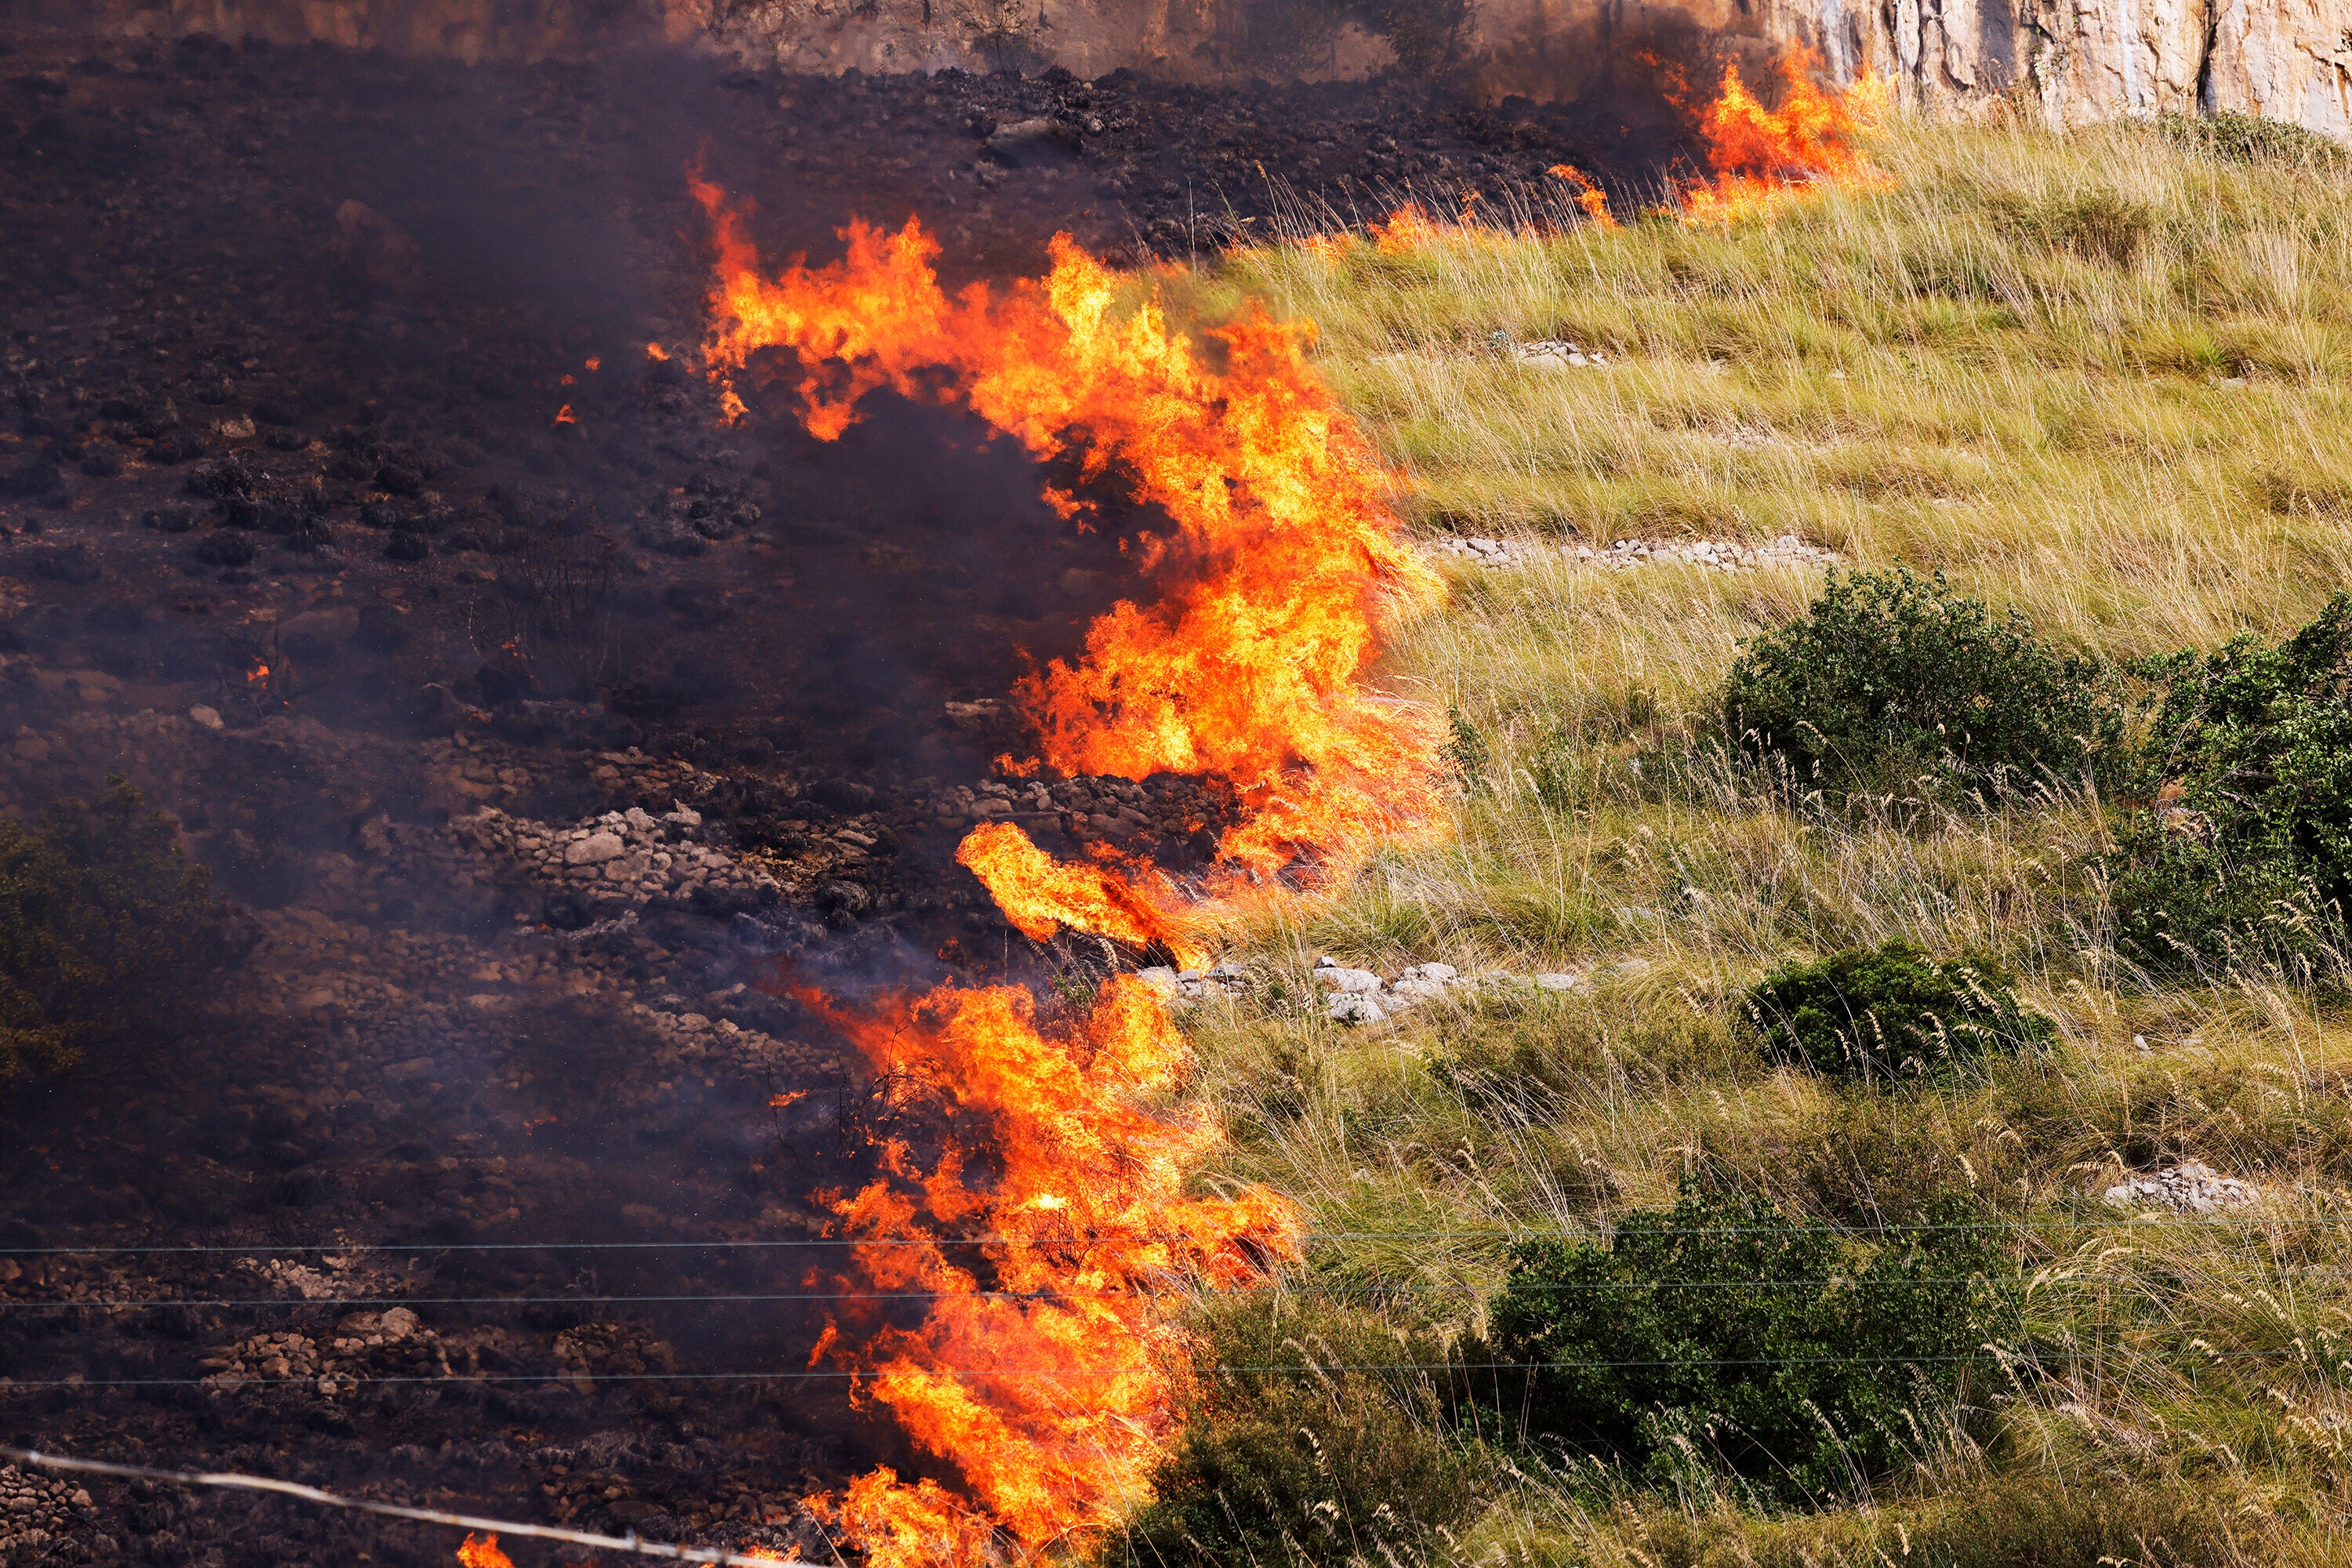 Flames burn in a field in Capaci, near Palermo, in Sicily, southern Italy